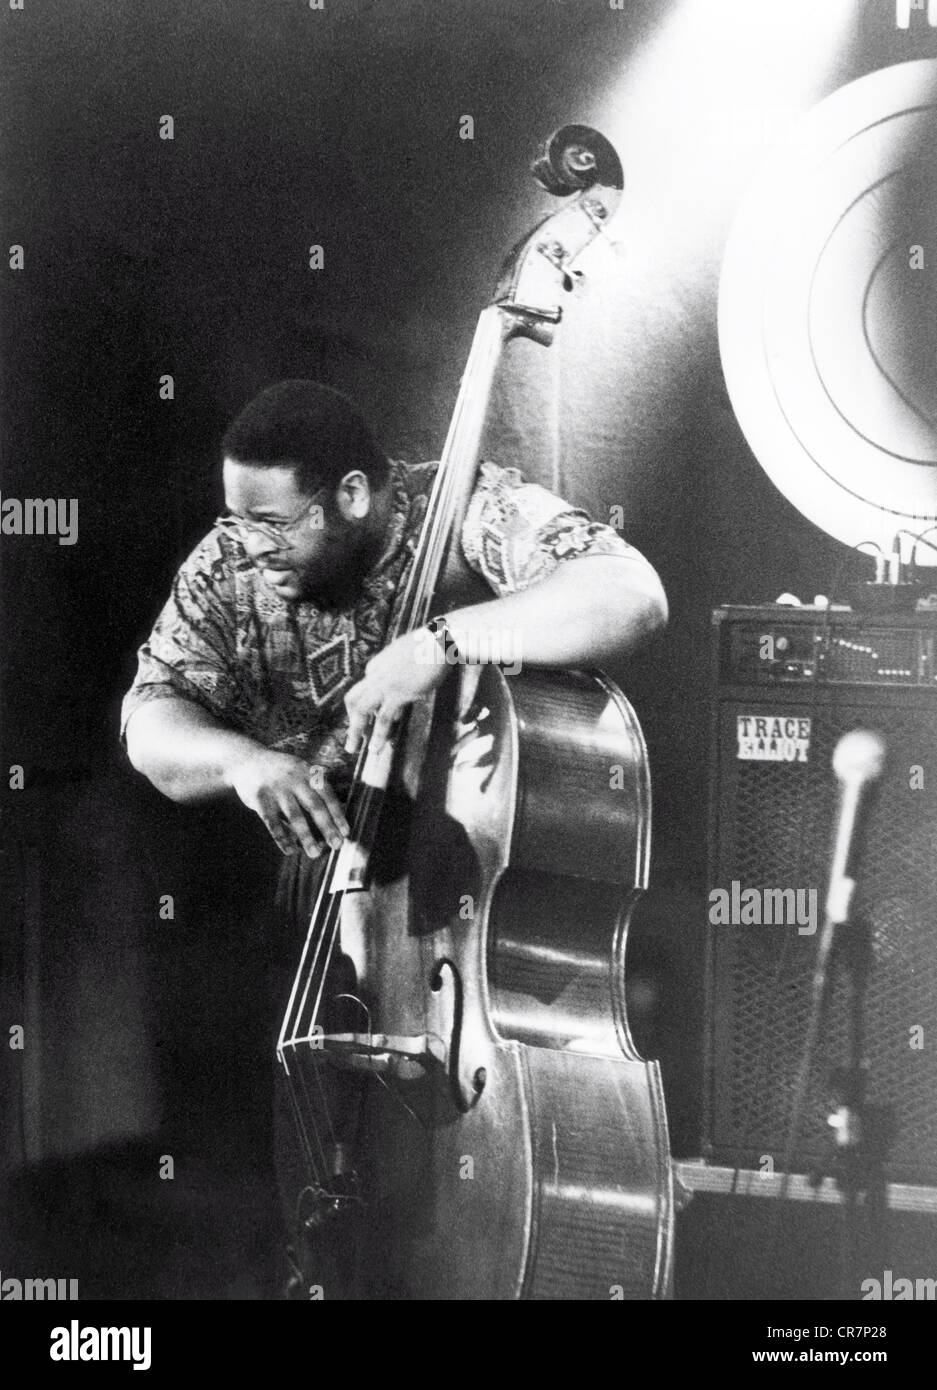 Dolphin, Dwayne, * 7.5.1963, American musician (jazz double bass player), half length, on stage, Jazz Festival, Montreux, 15.7.1992, 20th century, jazz musician, musical instrument, instrument, musical instruments, instruments, basses, contrabass, double bass, contrabasses, double bass player, bassist, make music, play music, making music, playing music, makes music, plays music, made music, played music, playing, play, standing, glasses, eyeglasses, picking, pick, pluck, plucking, amplifier, microphone, microphones, , Stock Photo